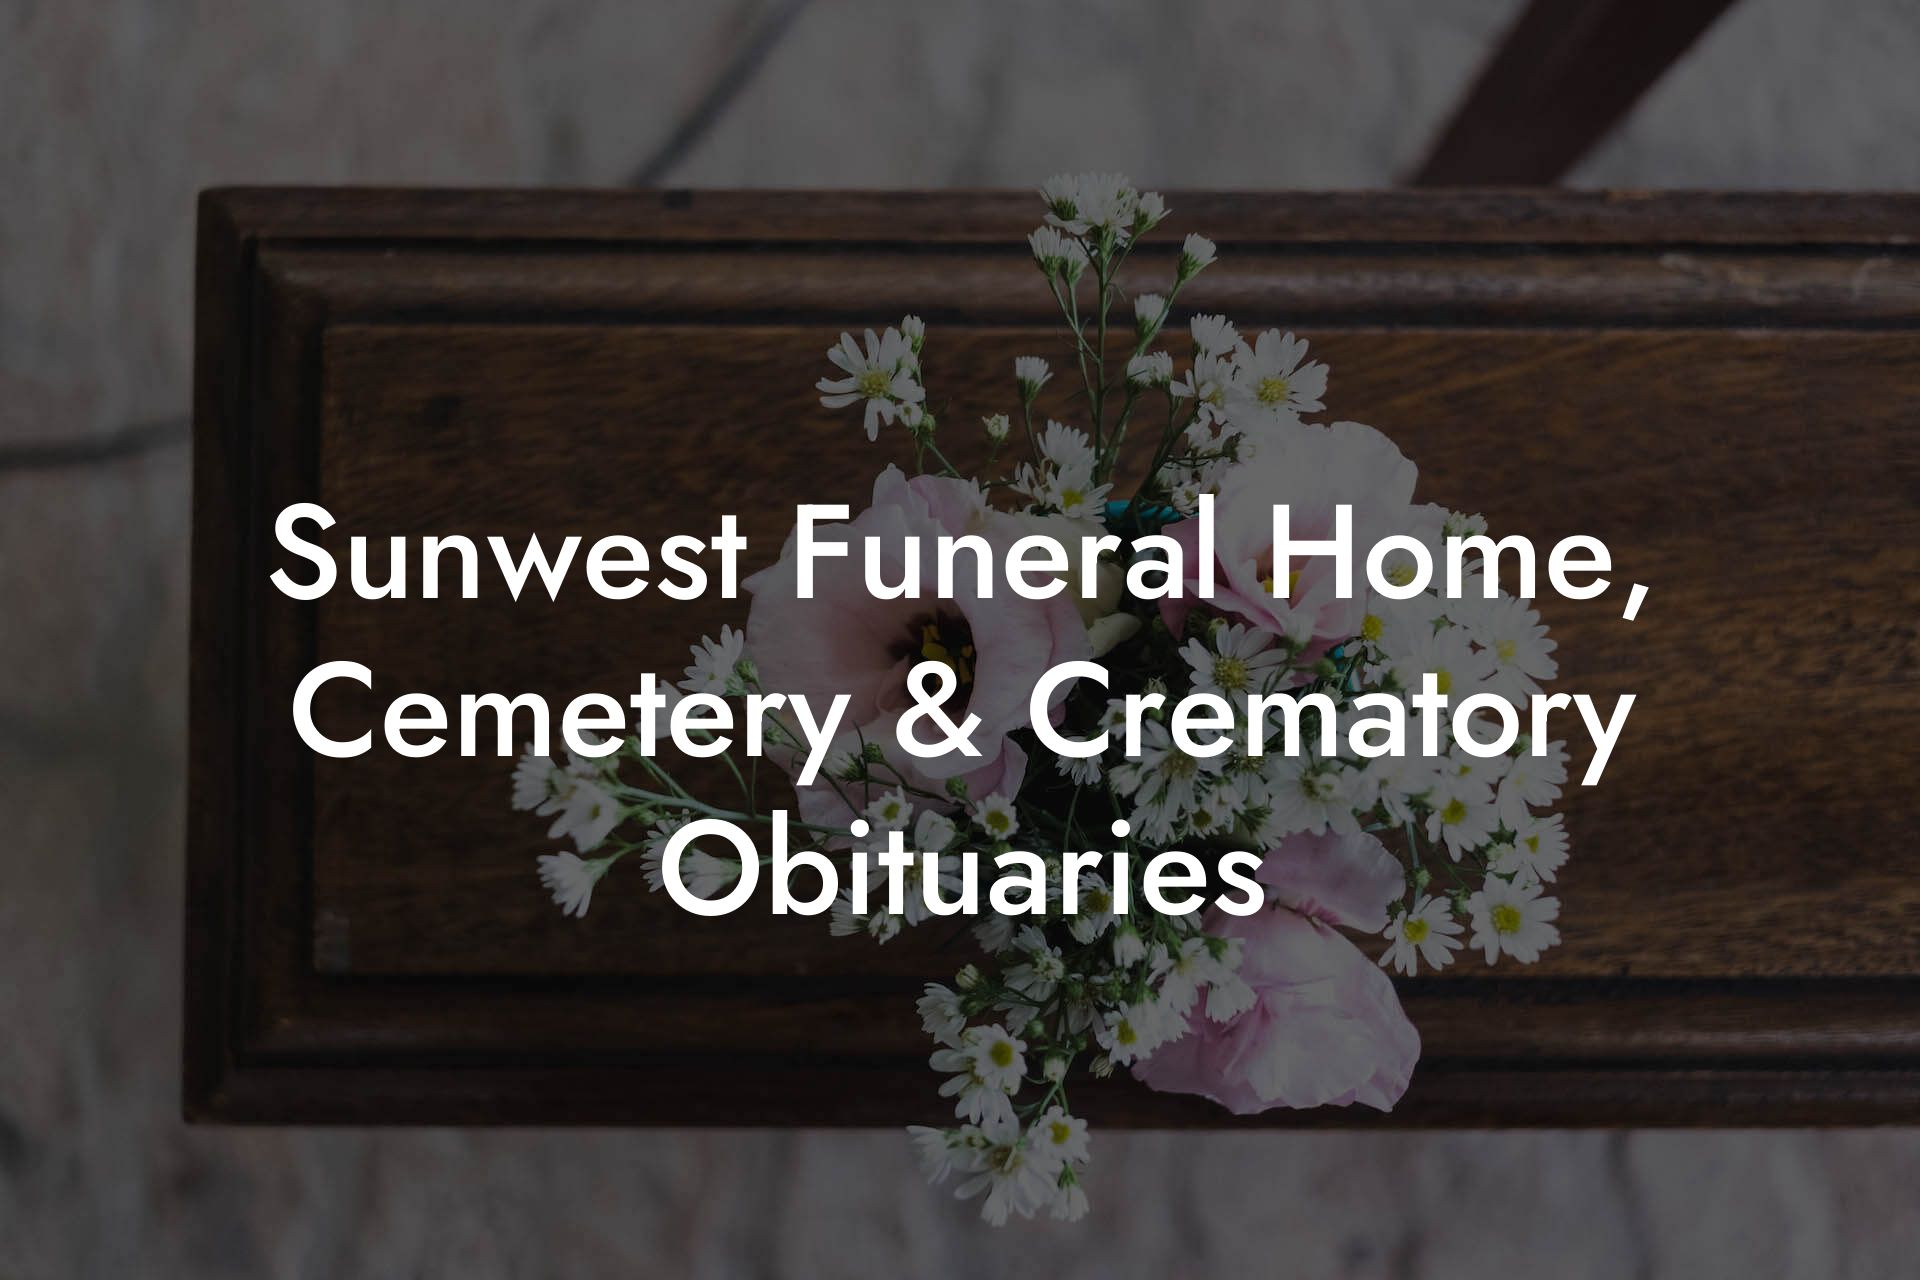 Sunwest Funeral Home, Cemetery & Crematory Obituaries